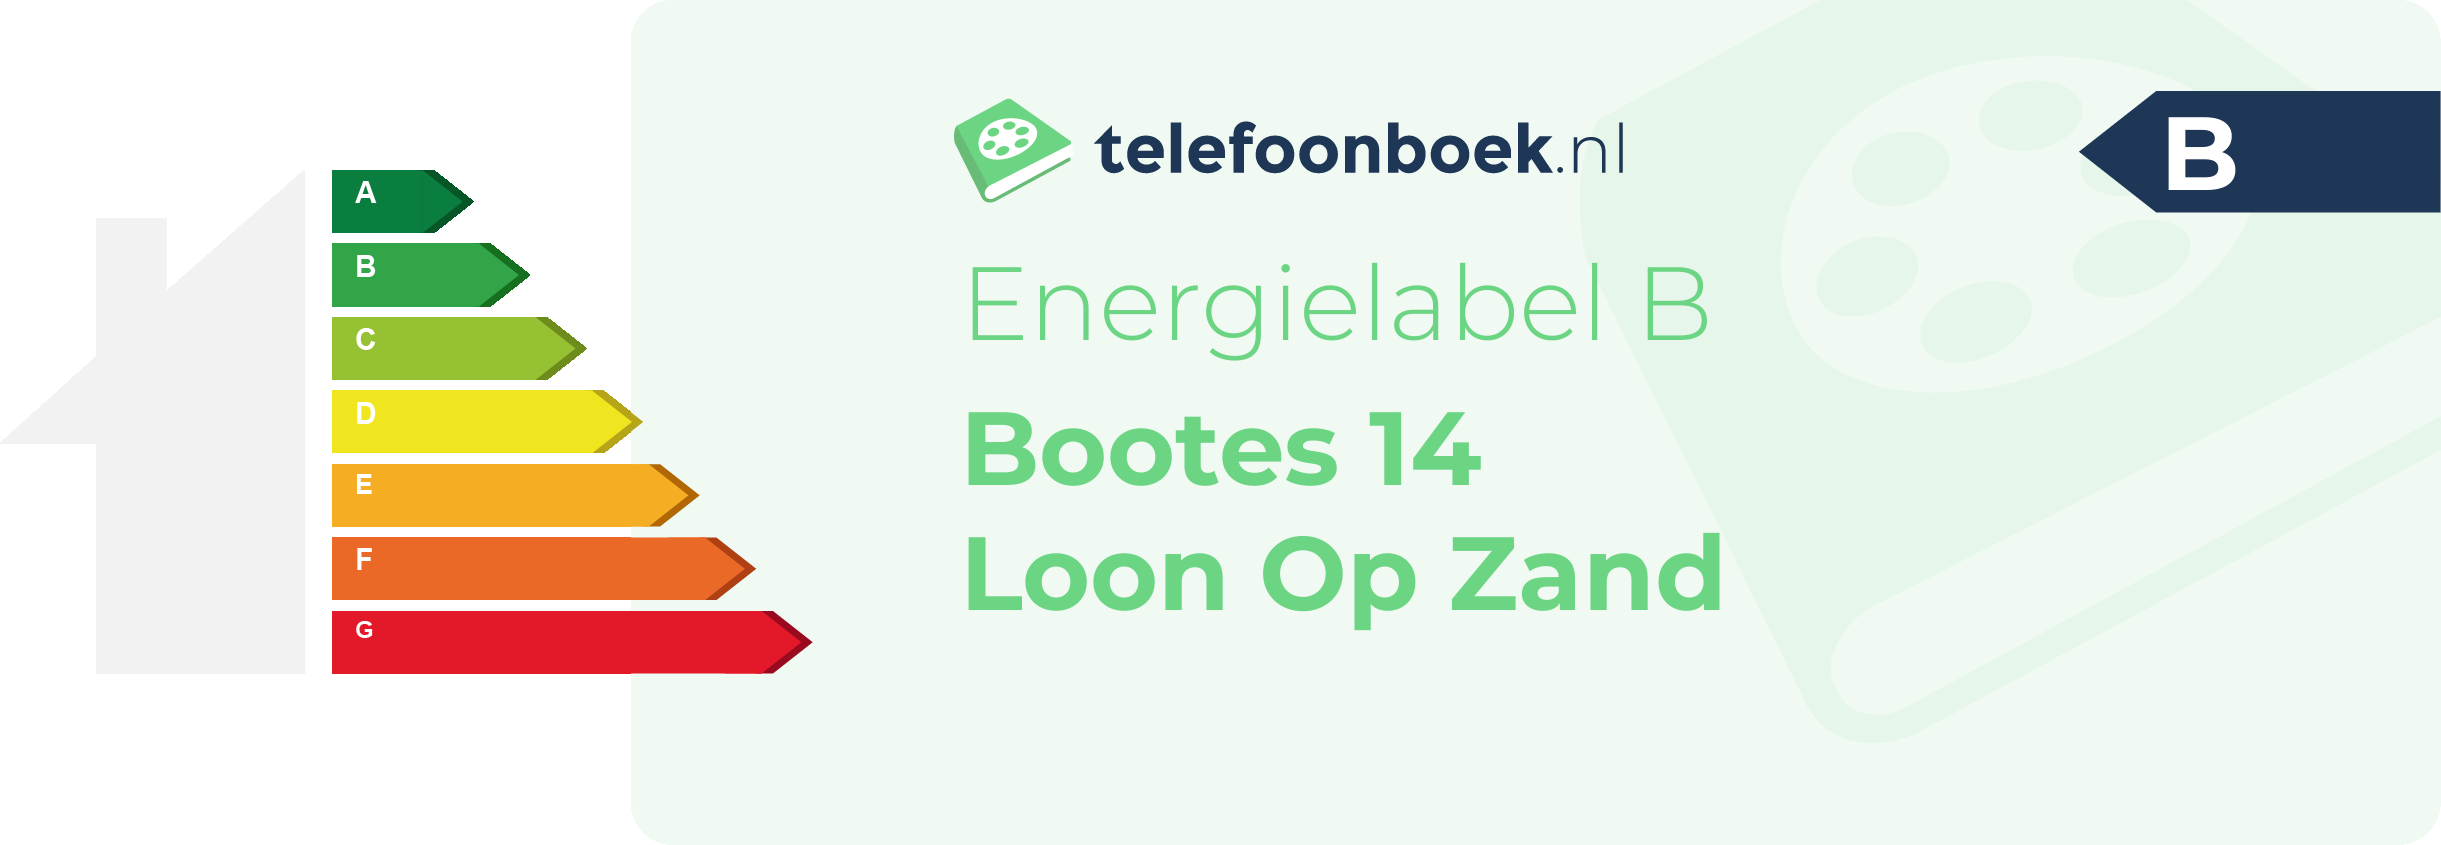 Energielabel Bootes 14 Loon Op Zand